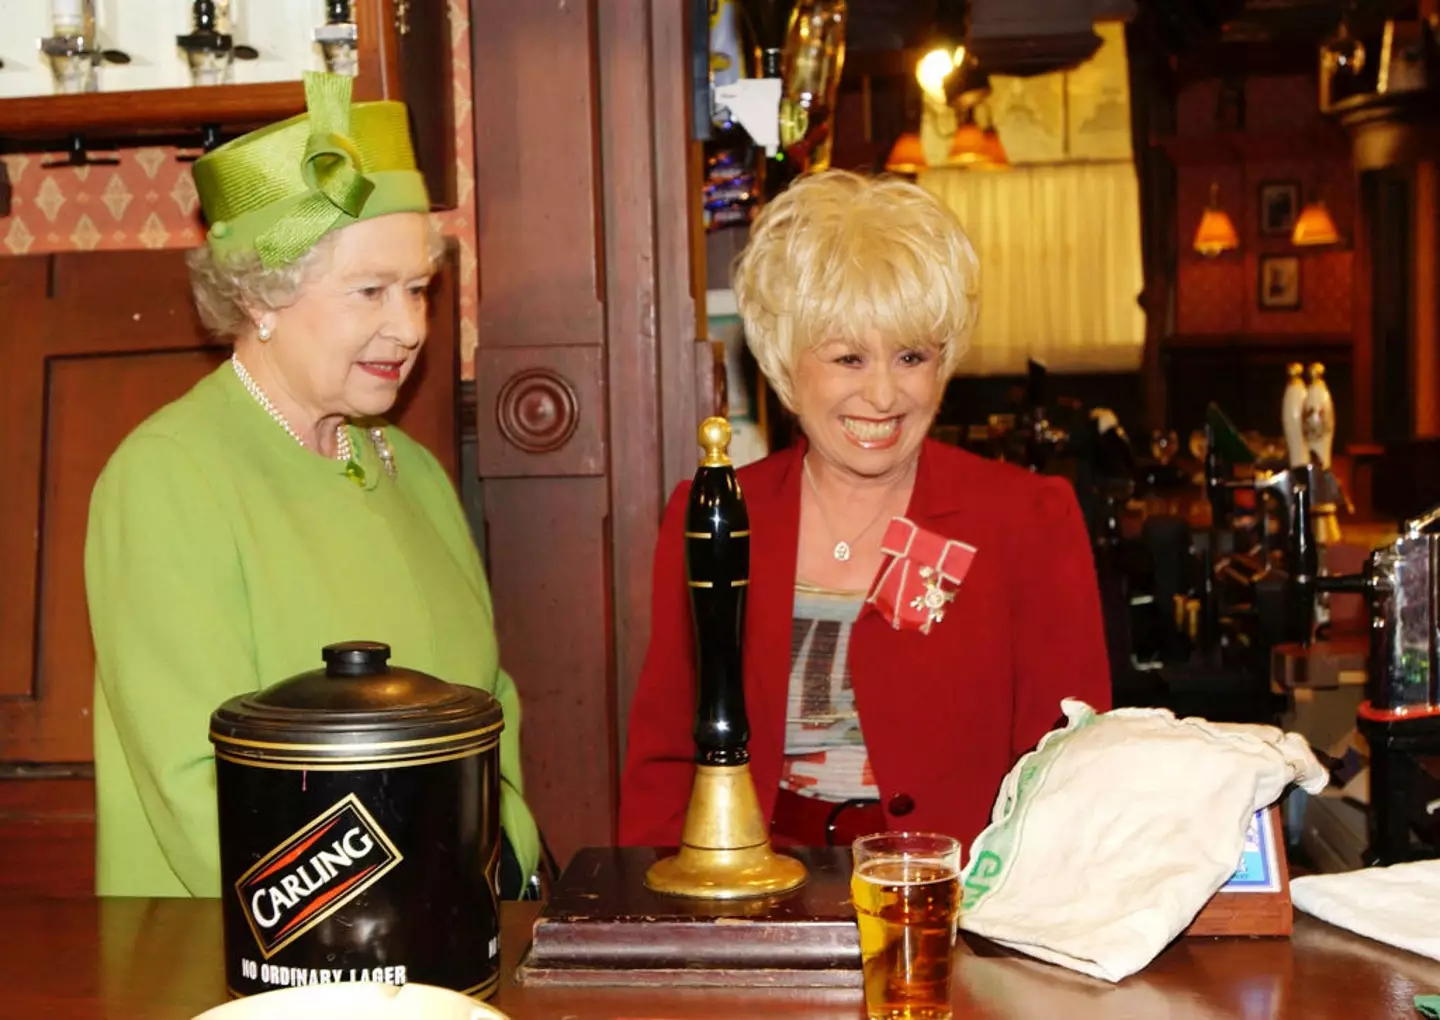 Barbara Windsor - pictured with the late Queen Elizabeth II - was best known for her role in EastEnders.